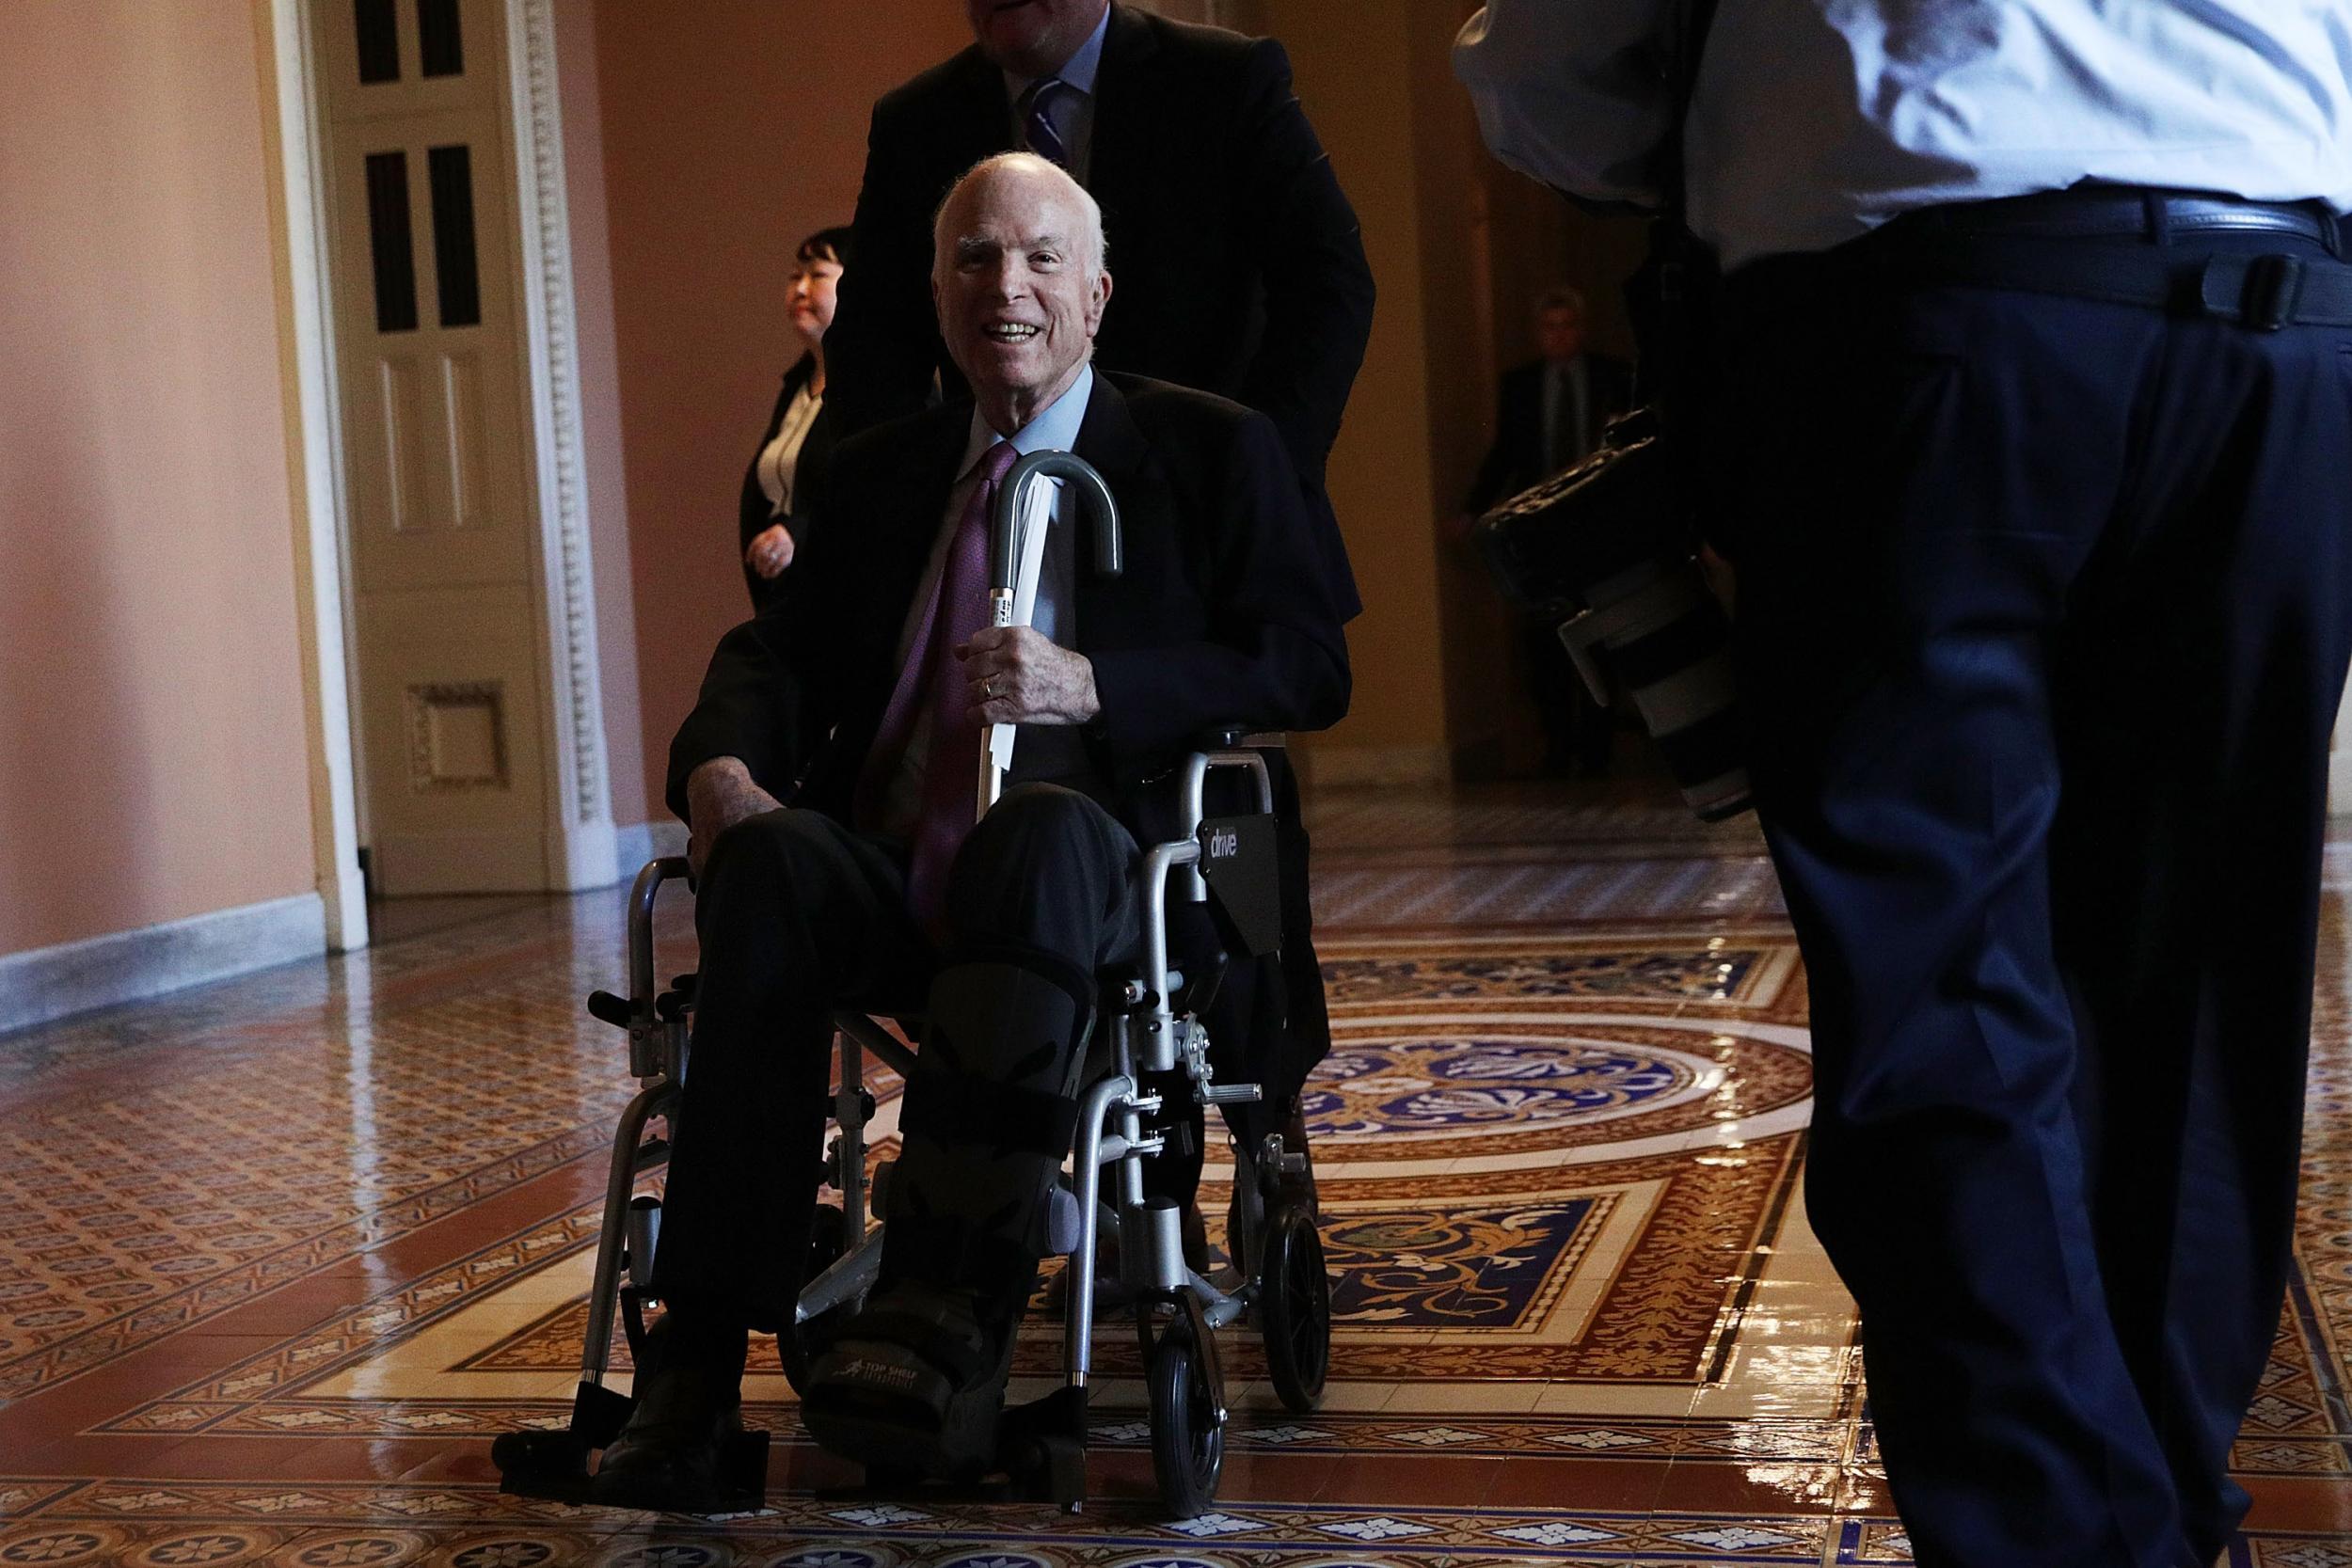 US Sen. John McCain passes by on a wheelchair in a hallway at the Capitol